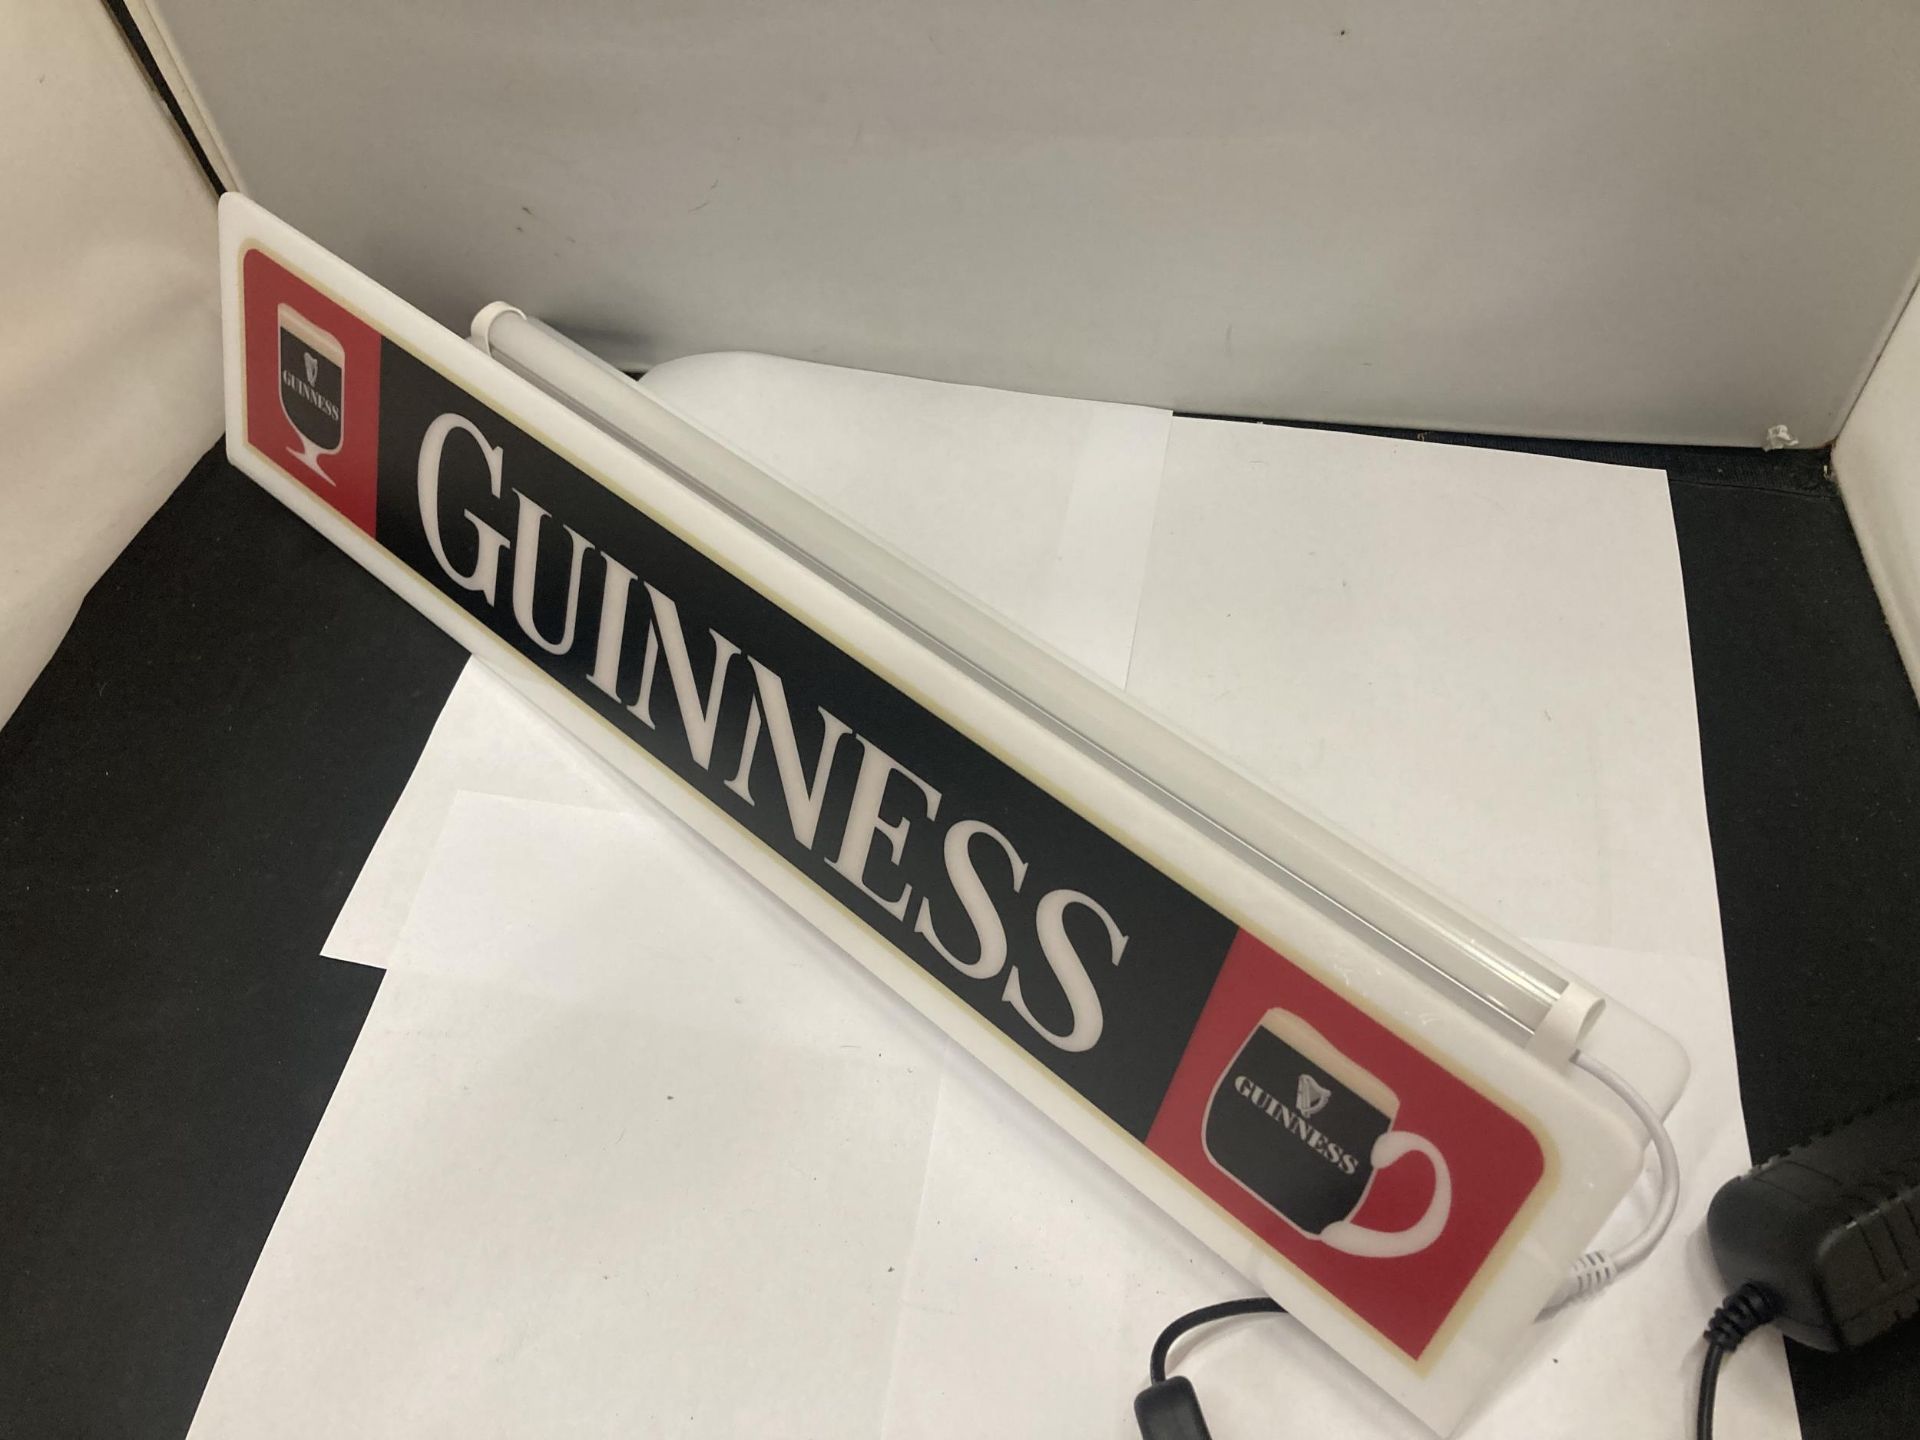 A ILLUMINATED GUINNESS SIGN LENGTH 50CM, HEIGHT 10.5CM - Image 2 of 2